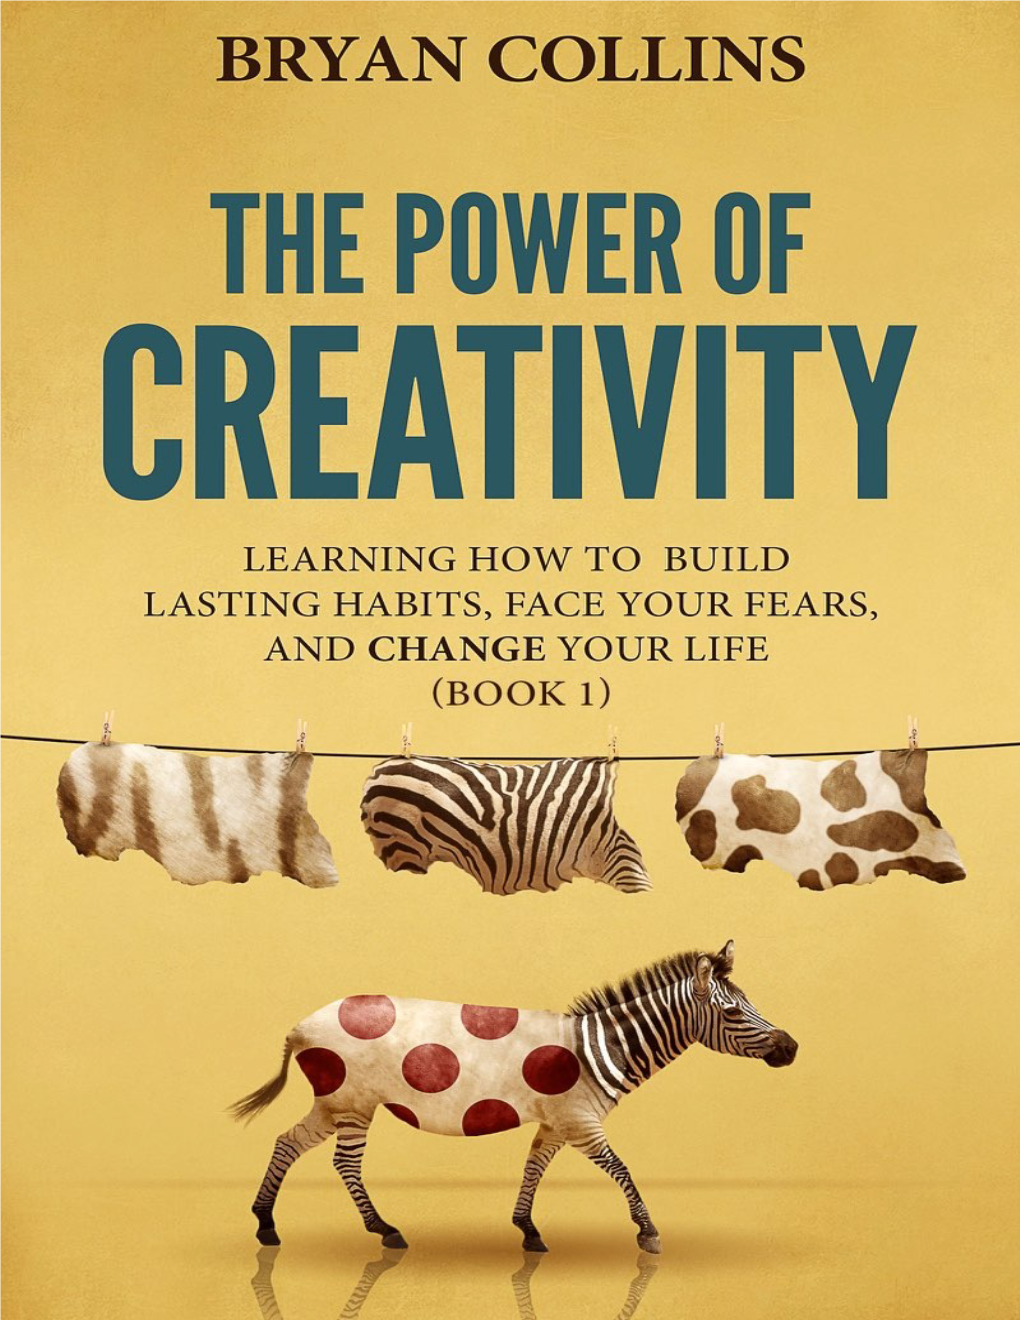 The Power of Creativity \(Book 1\): Learning How to Build Lasting